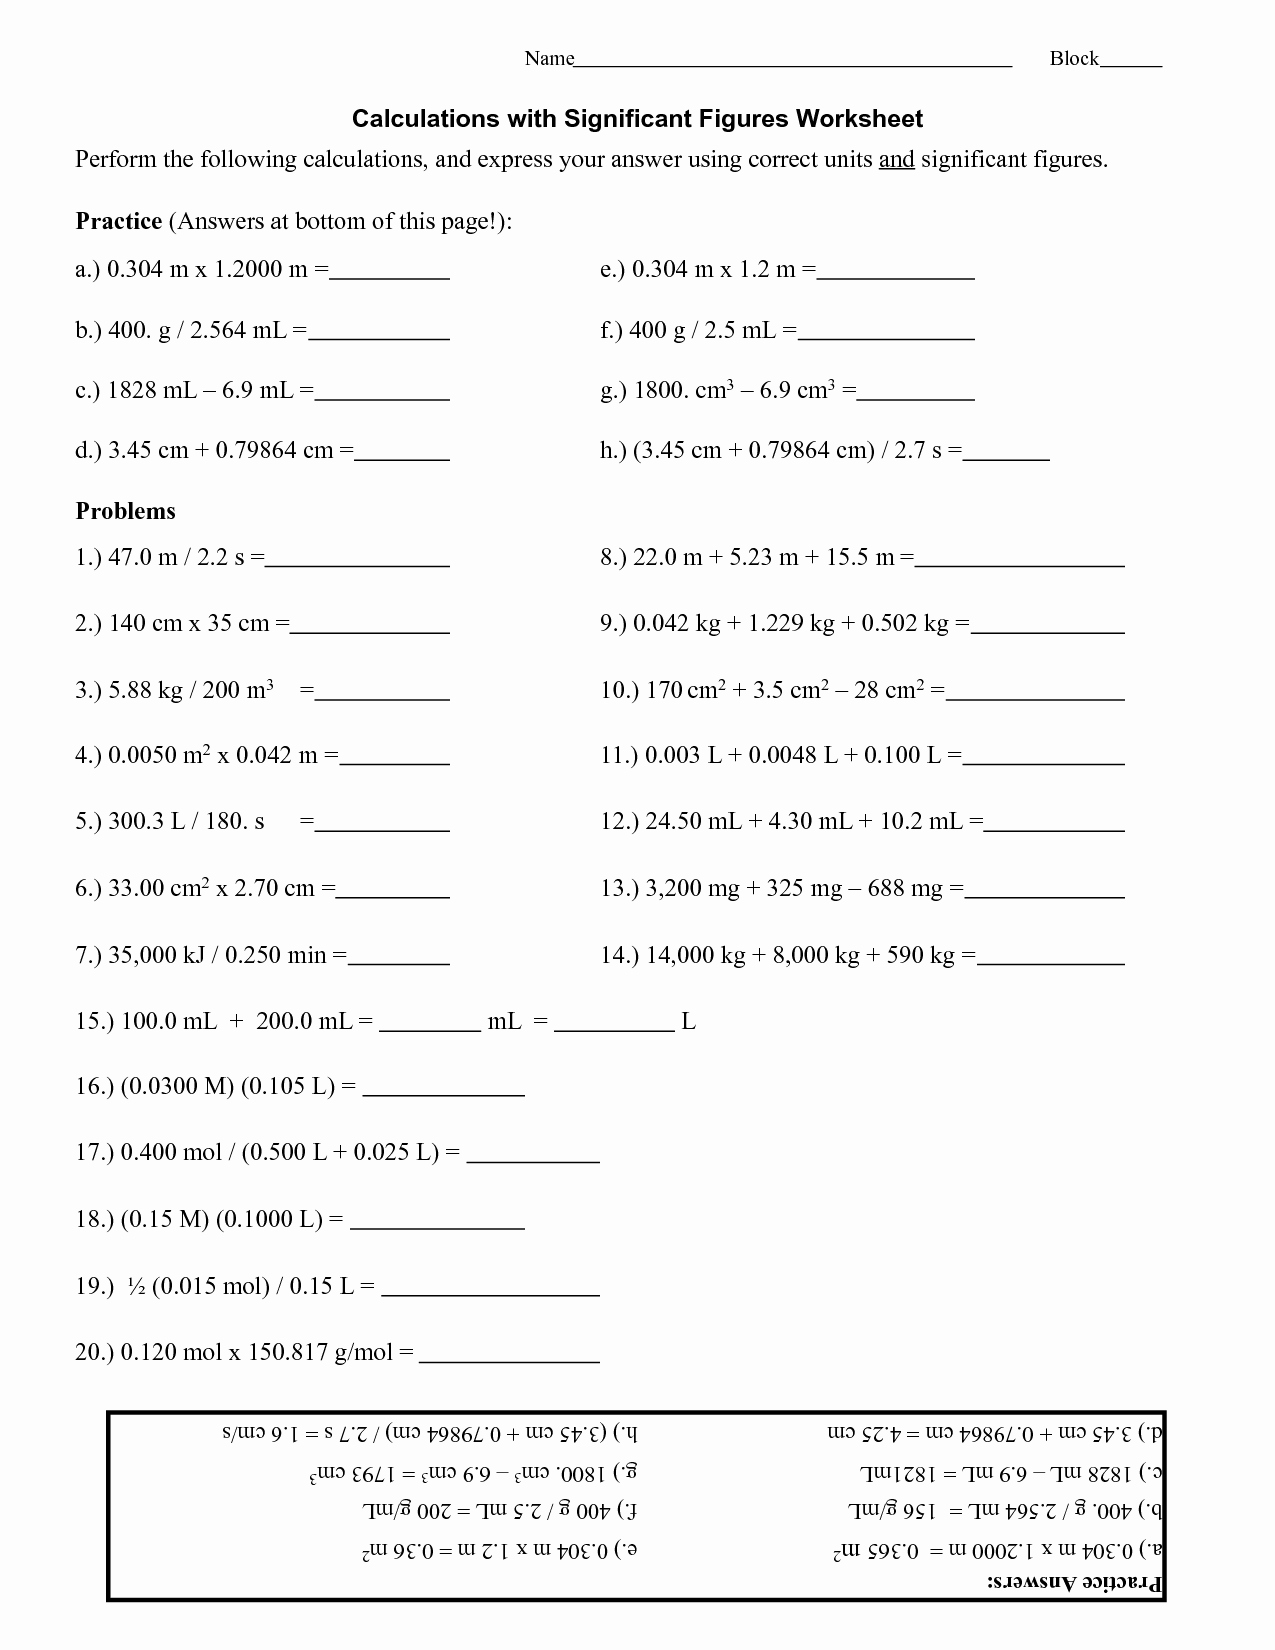 Sig Figs Worksheet with Answers Inspirational Worksheet Significant Figures with Answers